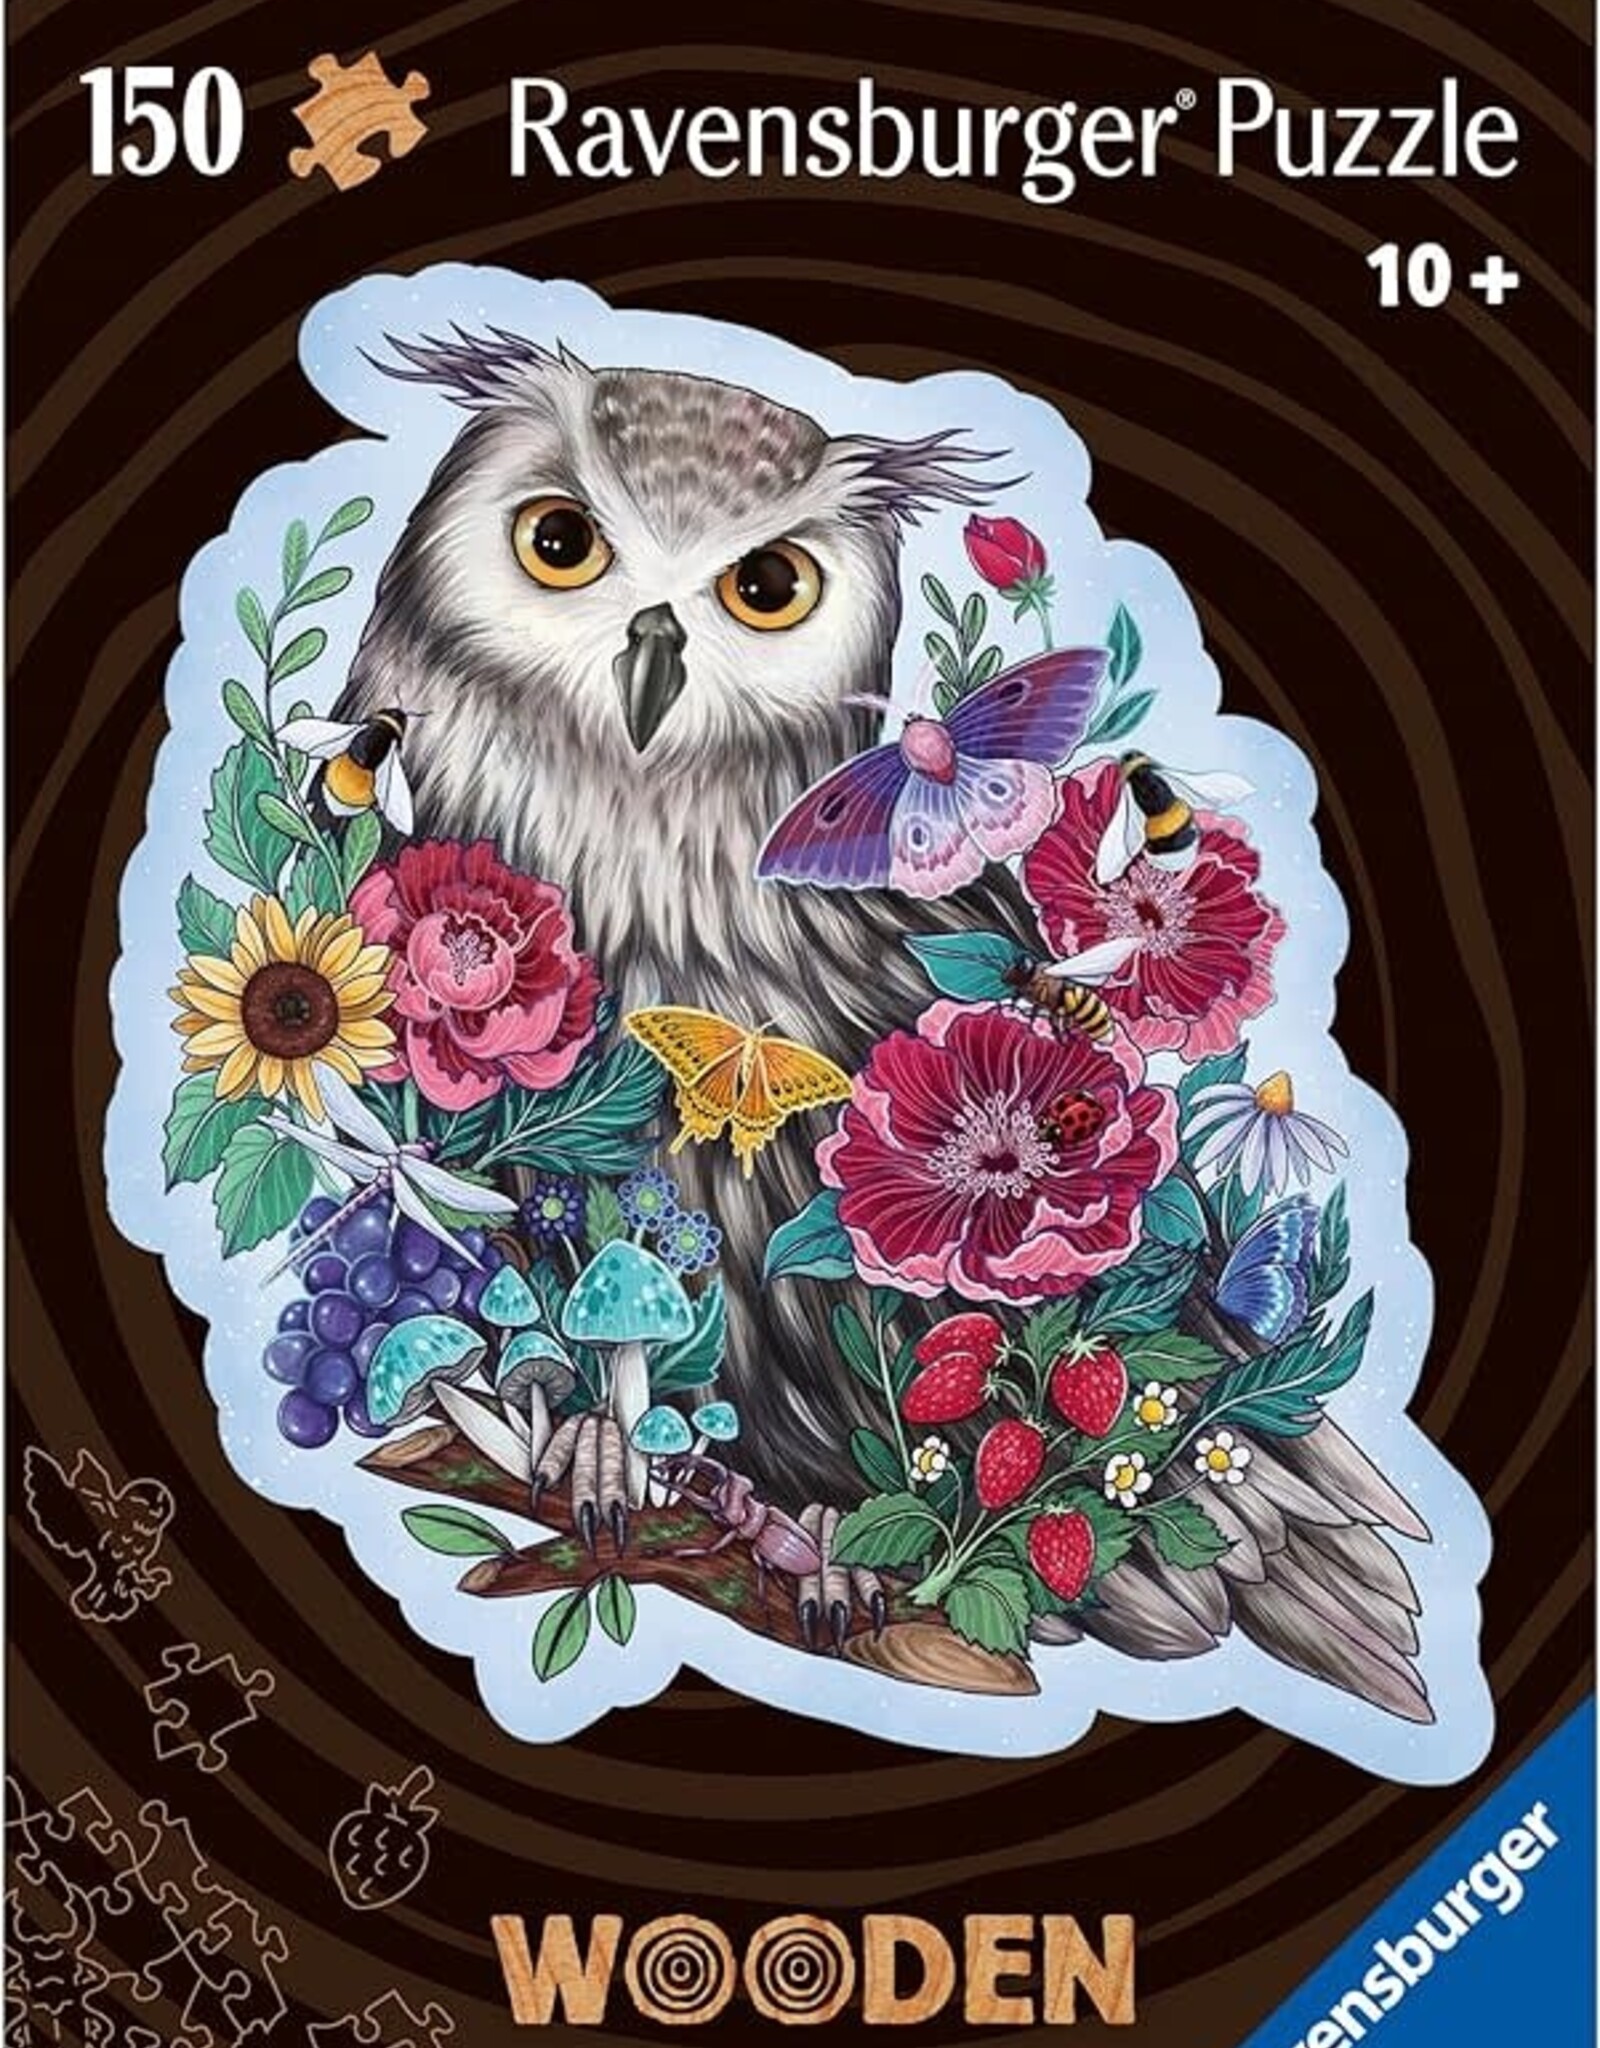 Ravensburger 150pc Wood Puzzle - Mysterious Owl